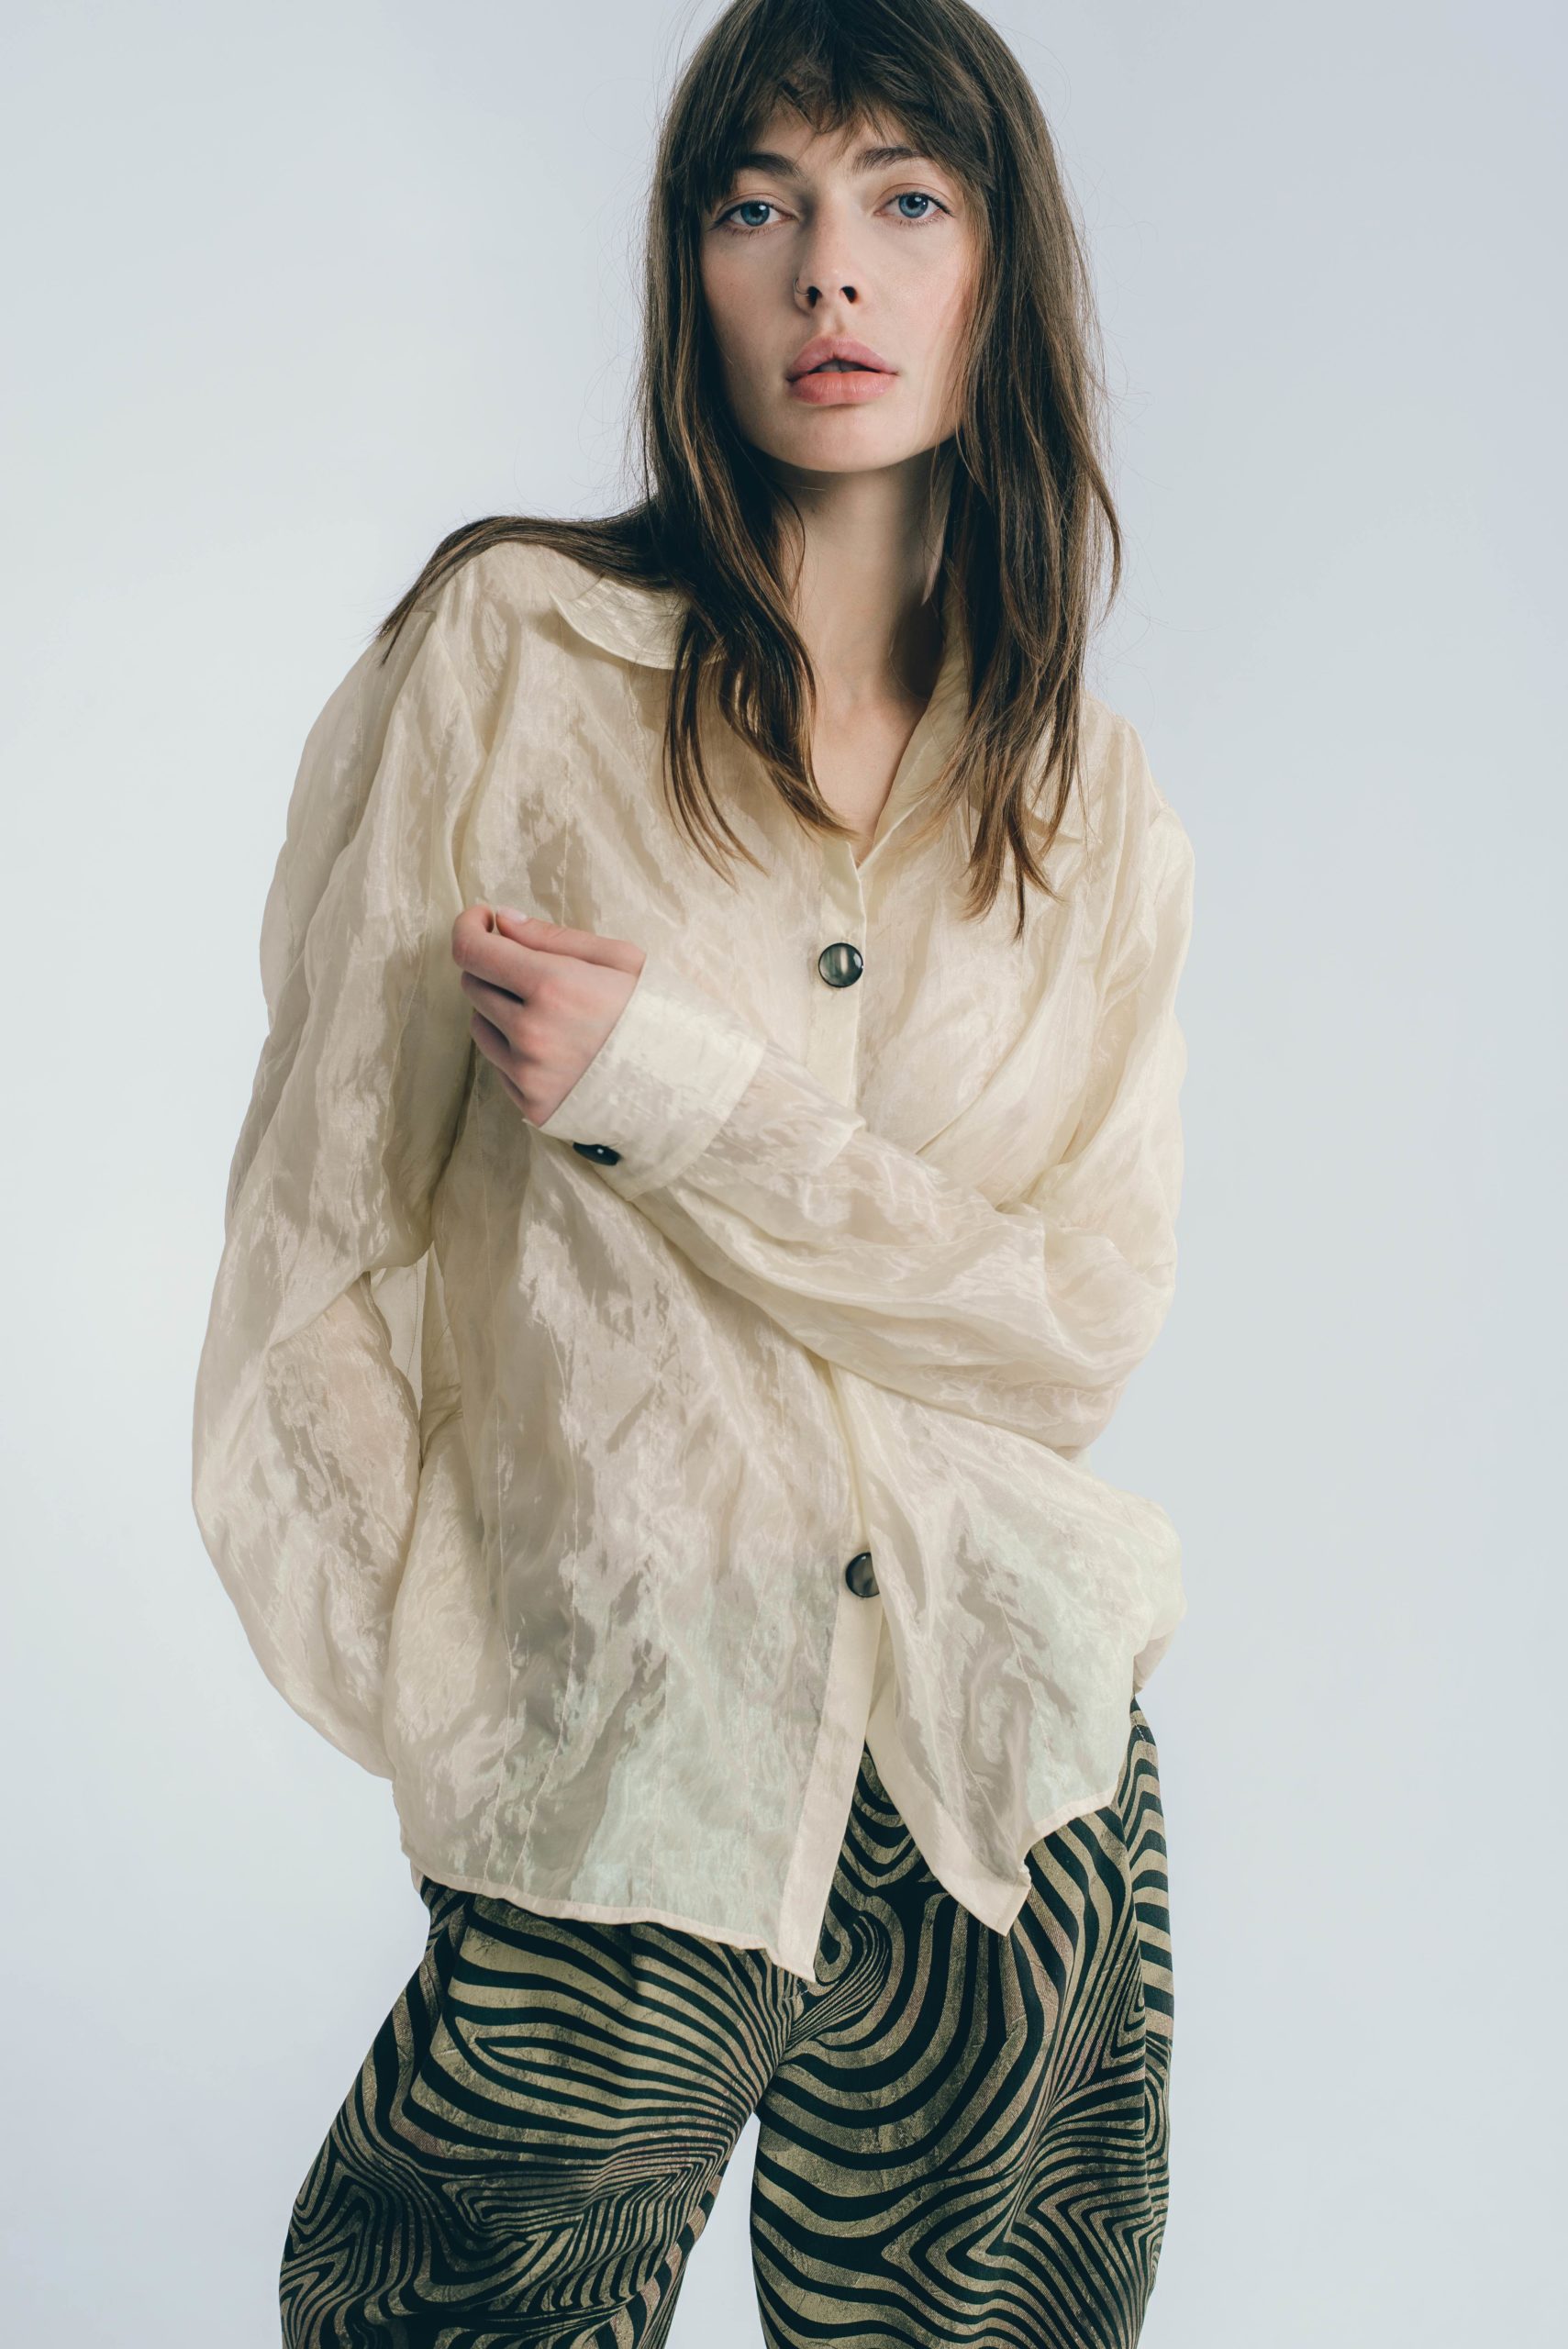 Ukrainian Label MASHAT Unveils ‘Dna’ Collection Made With Electrical ...